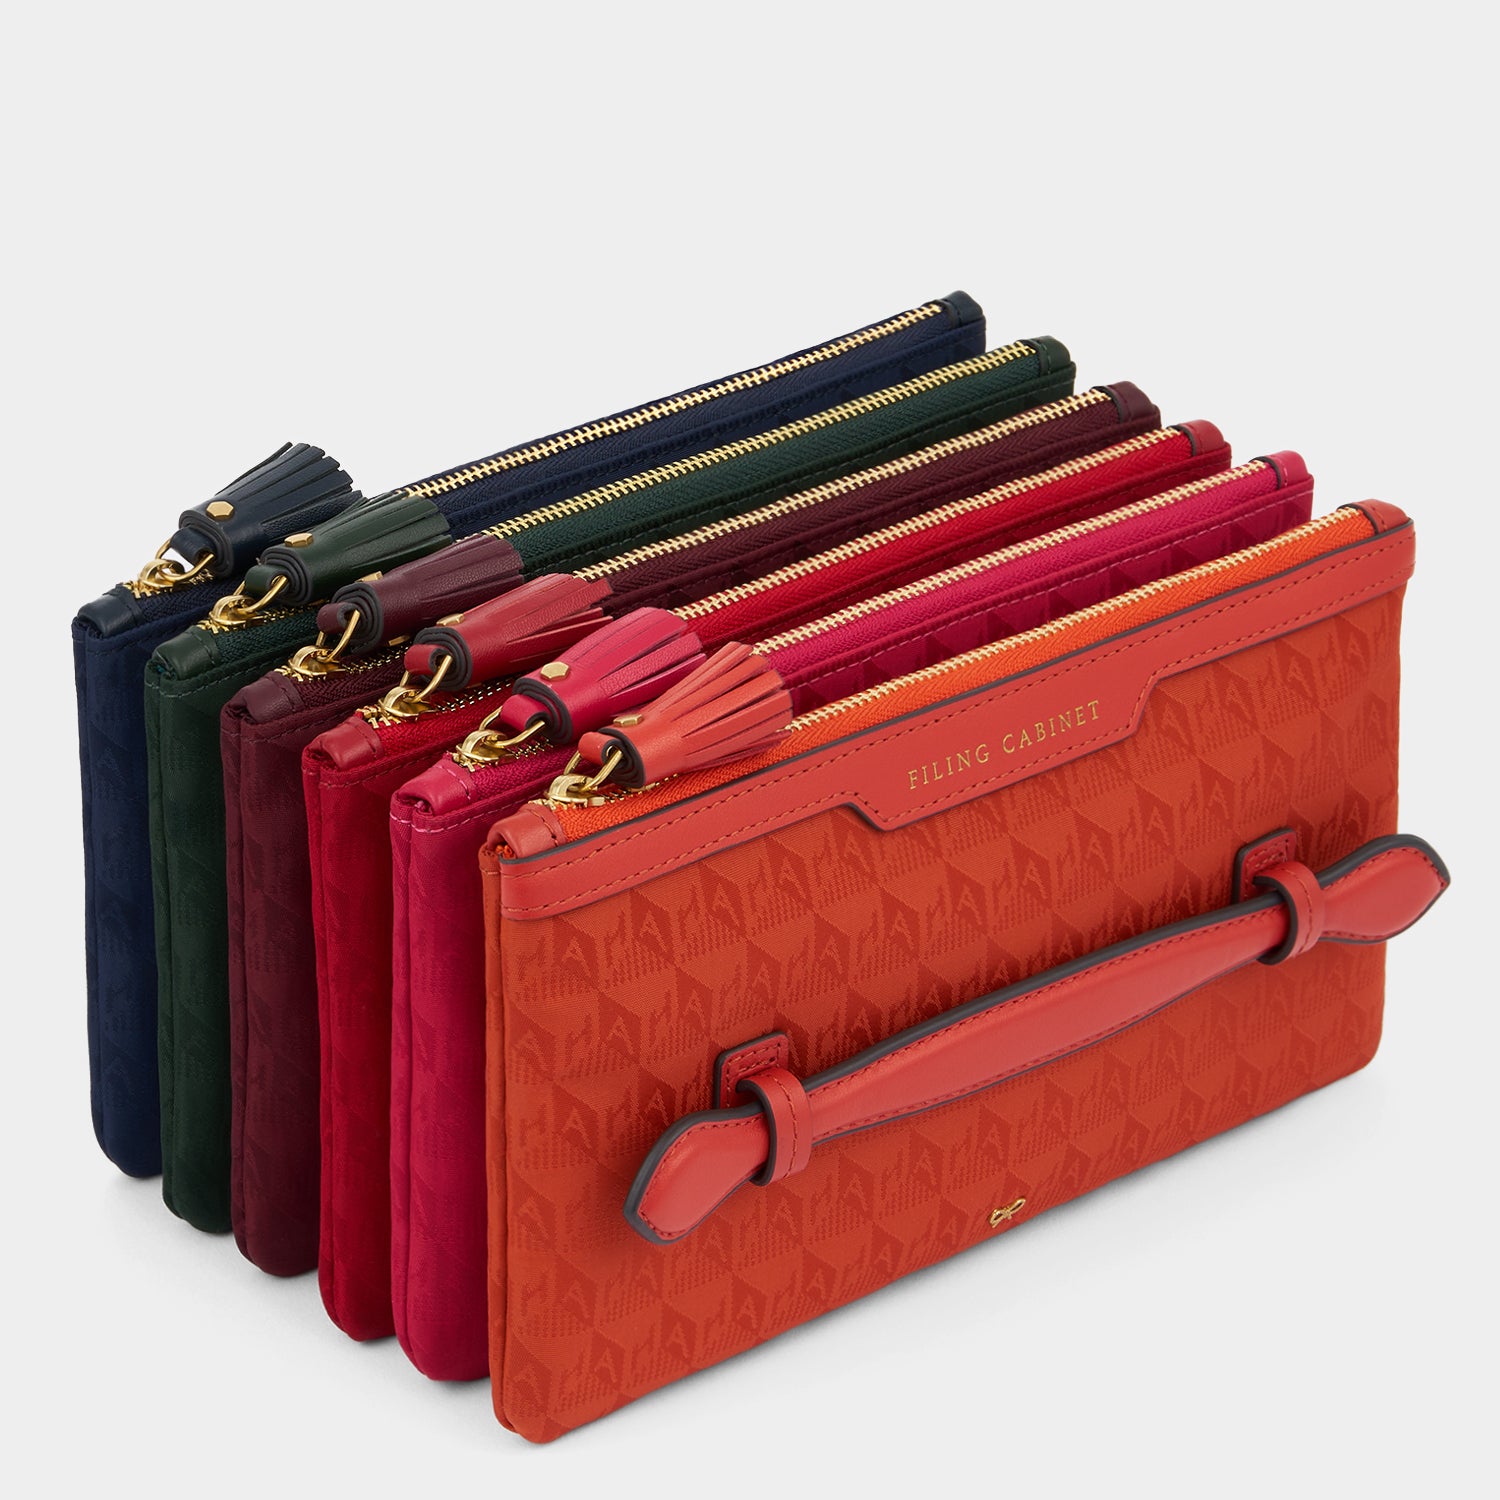 Filing Cabinet Pouch -

                  
                    Jacquard Nylon in Multi -
                  

                  Anya Hindmarch UK
